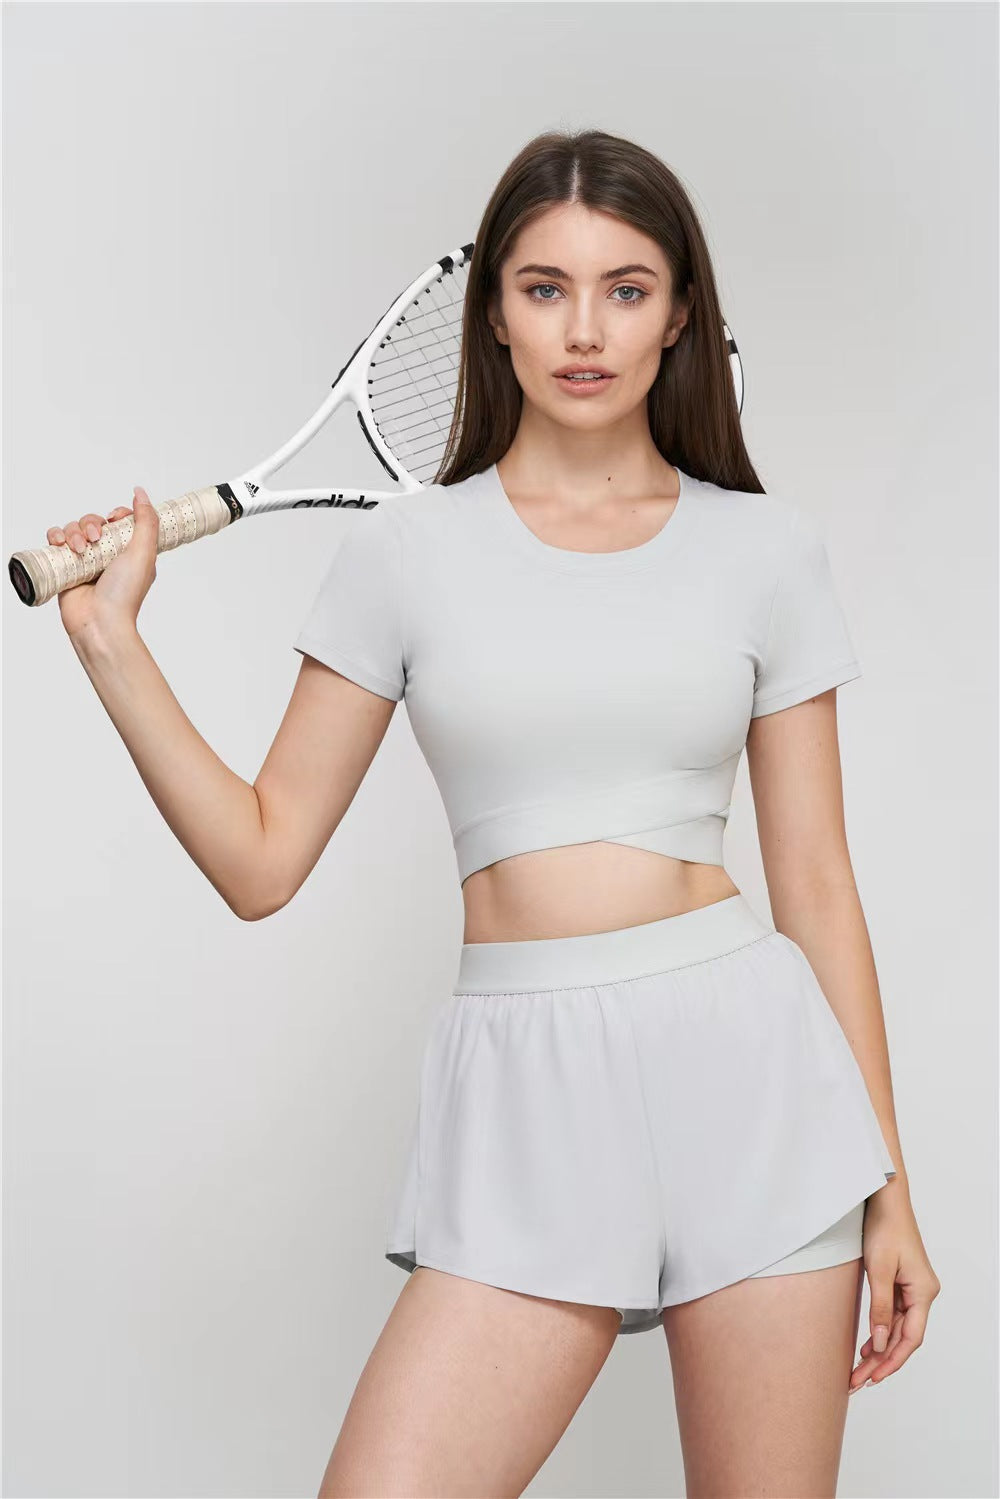 Tennis tights for girls